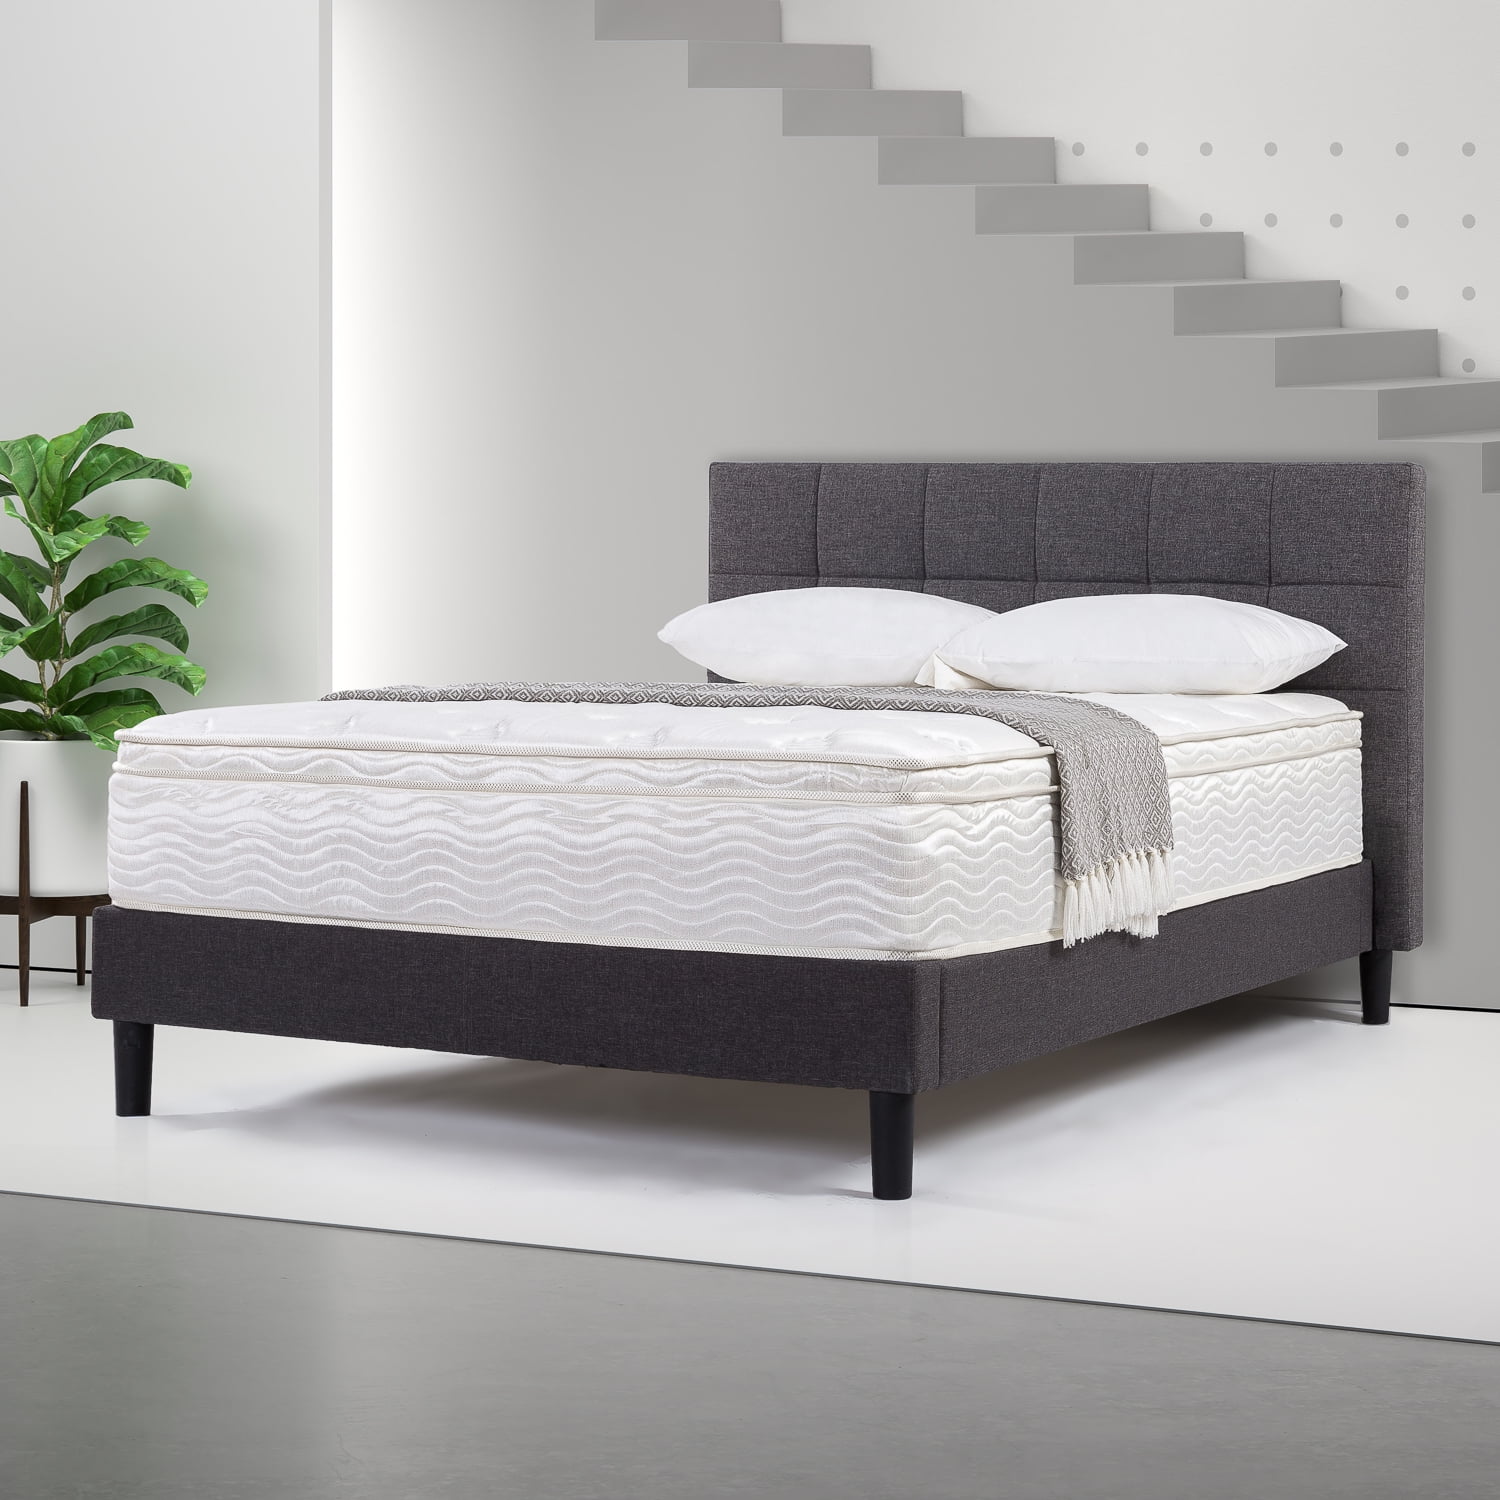 Night Therapy 12" Spring Mattress & Steel Bed Frame KING QUEEN FULL TWIN SIZE 